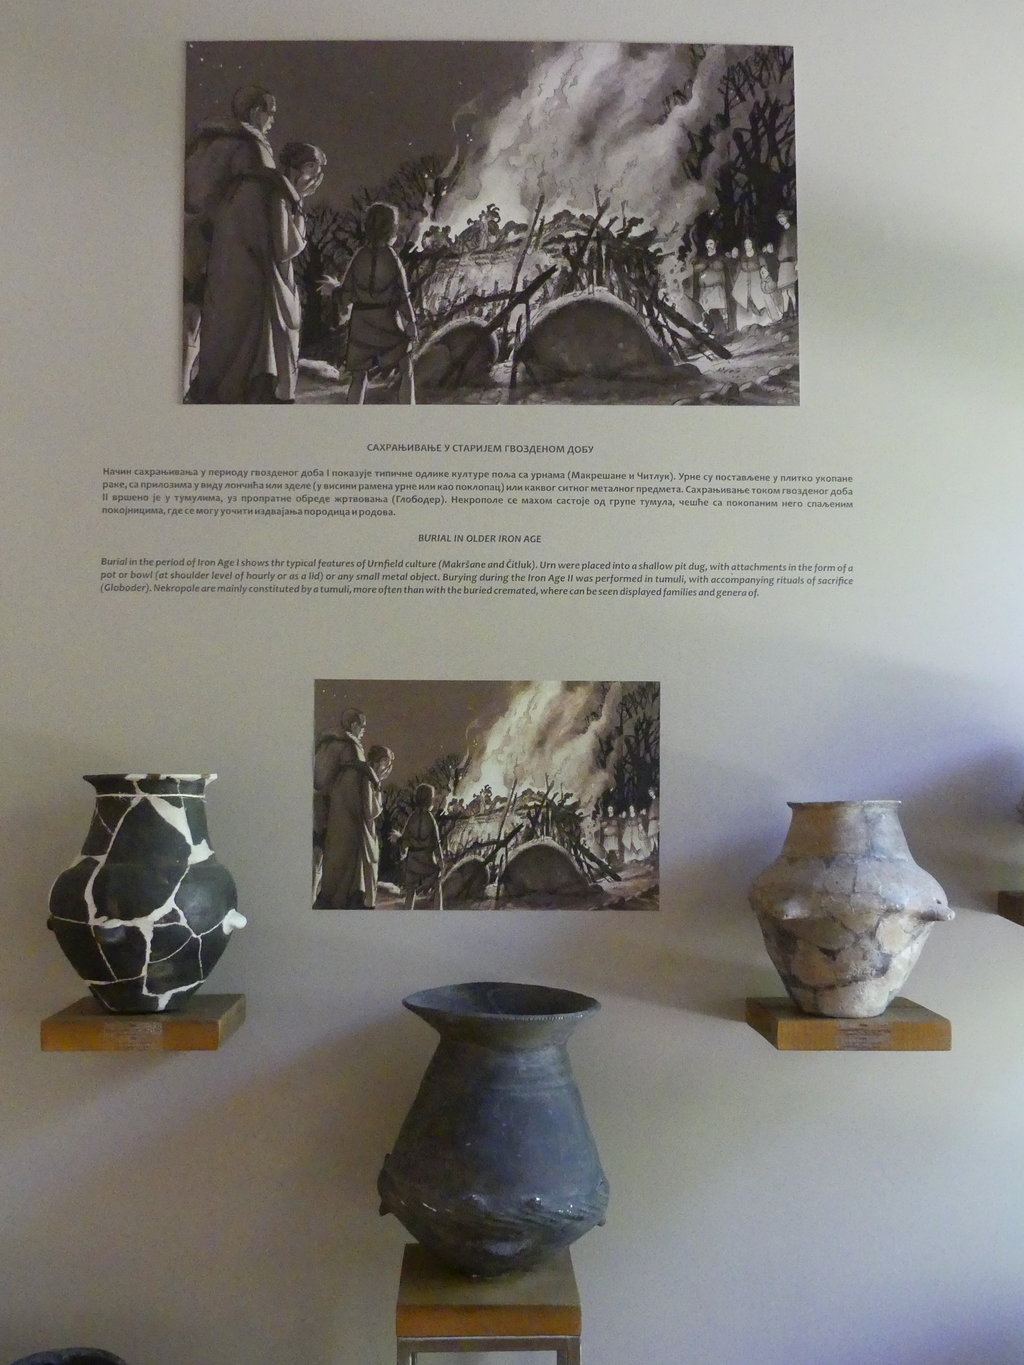 Major facts of the Urn-filed culture explained (Note the two urns preserved in the museum of Kruševac, in another showcase).  April 2018.